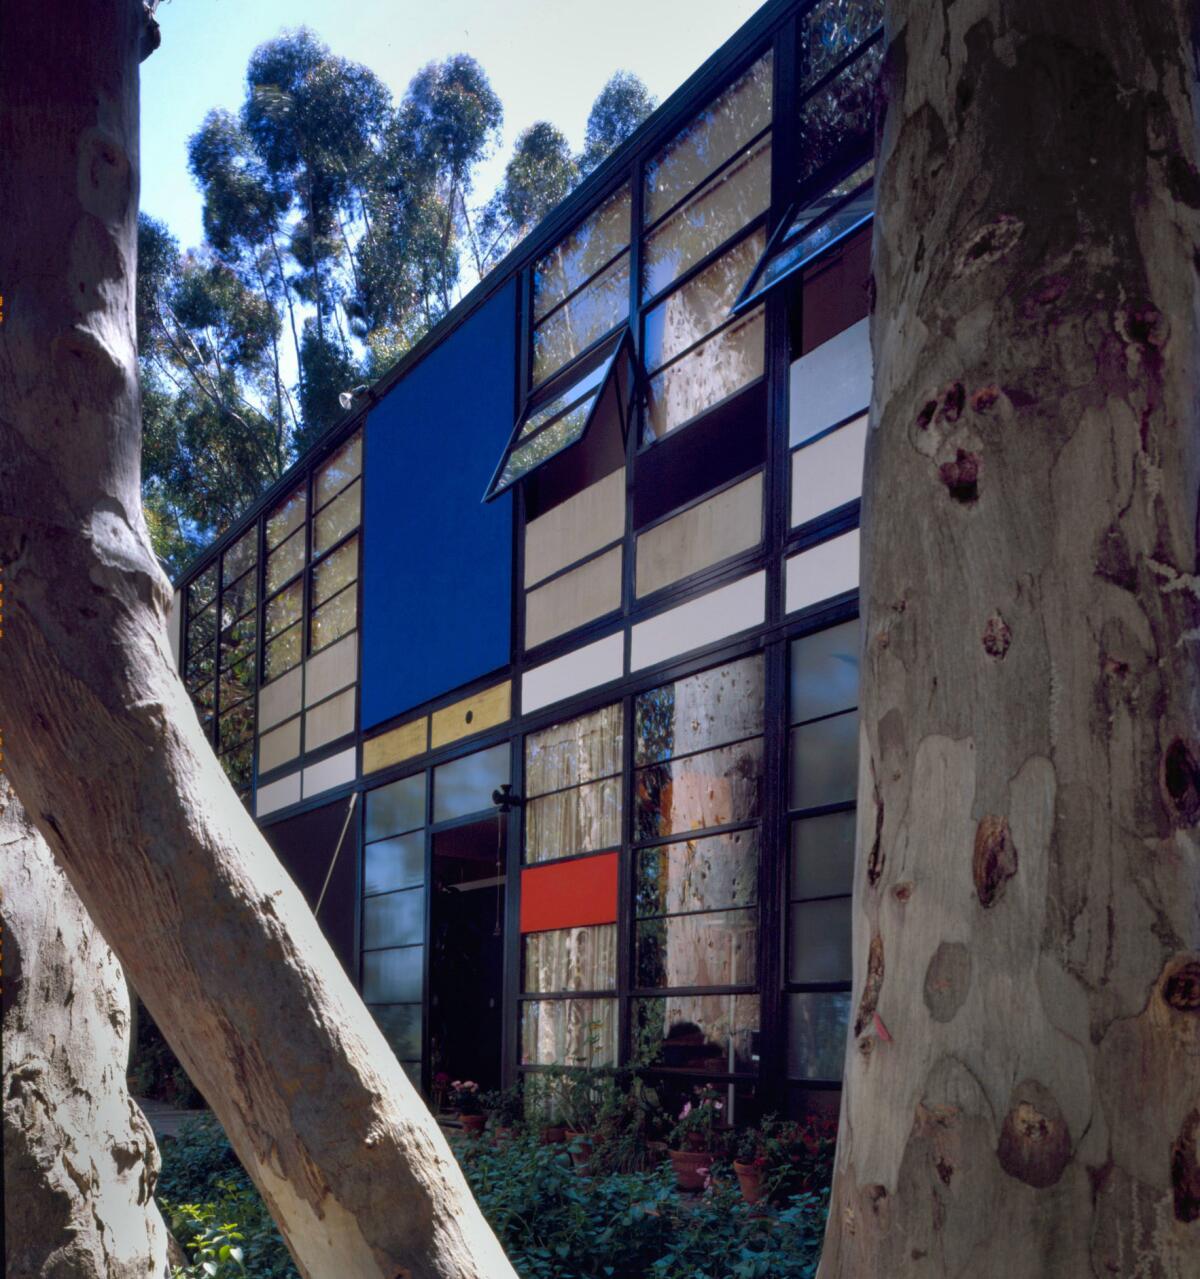 The iconic home finished in 1949 by Charles and Ray Eames is under evacuation from the Getty fire.